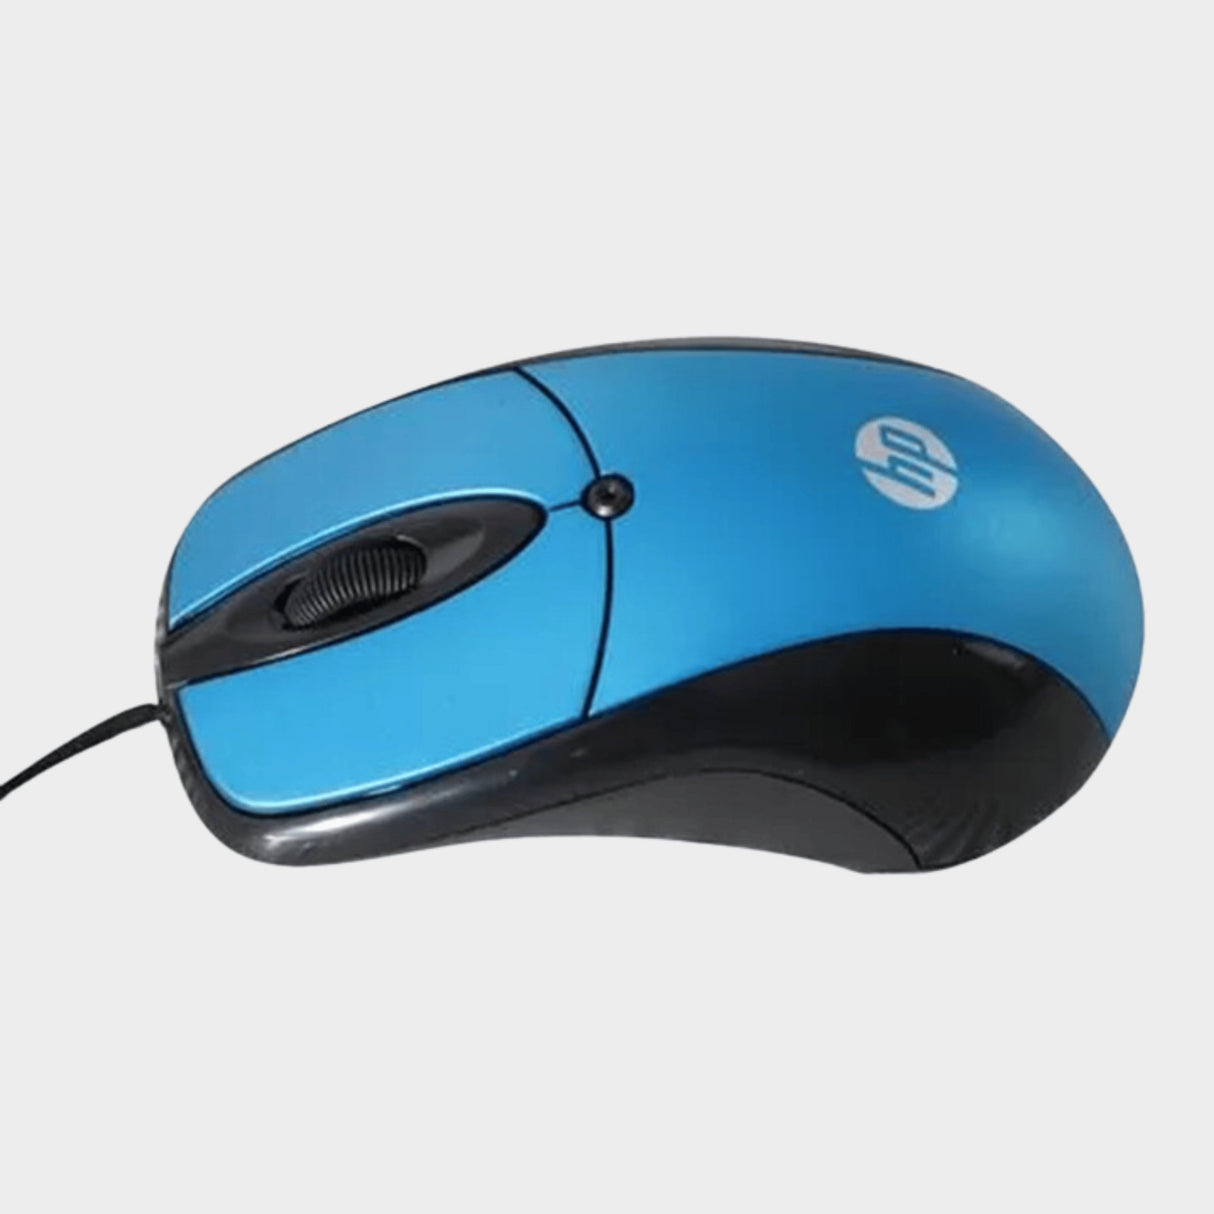 Hp Comfort Optical Wired Mouse, Blue - KWT Tech Mart